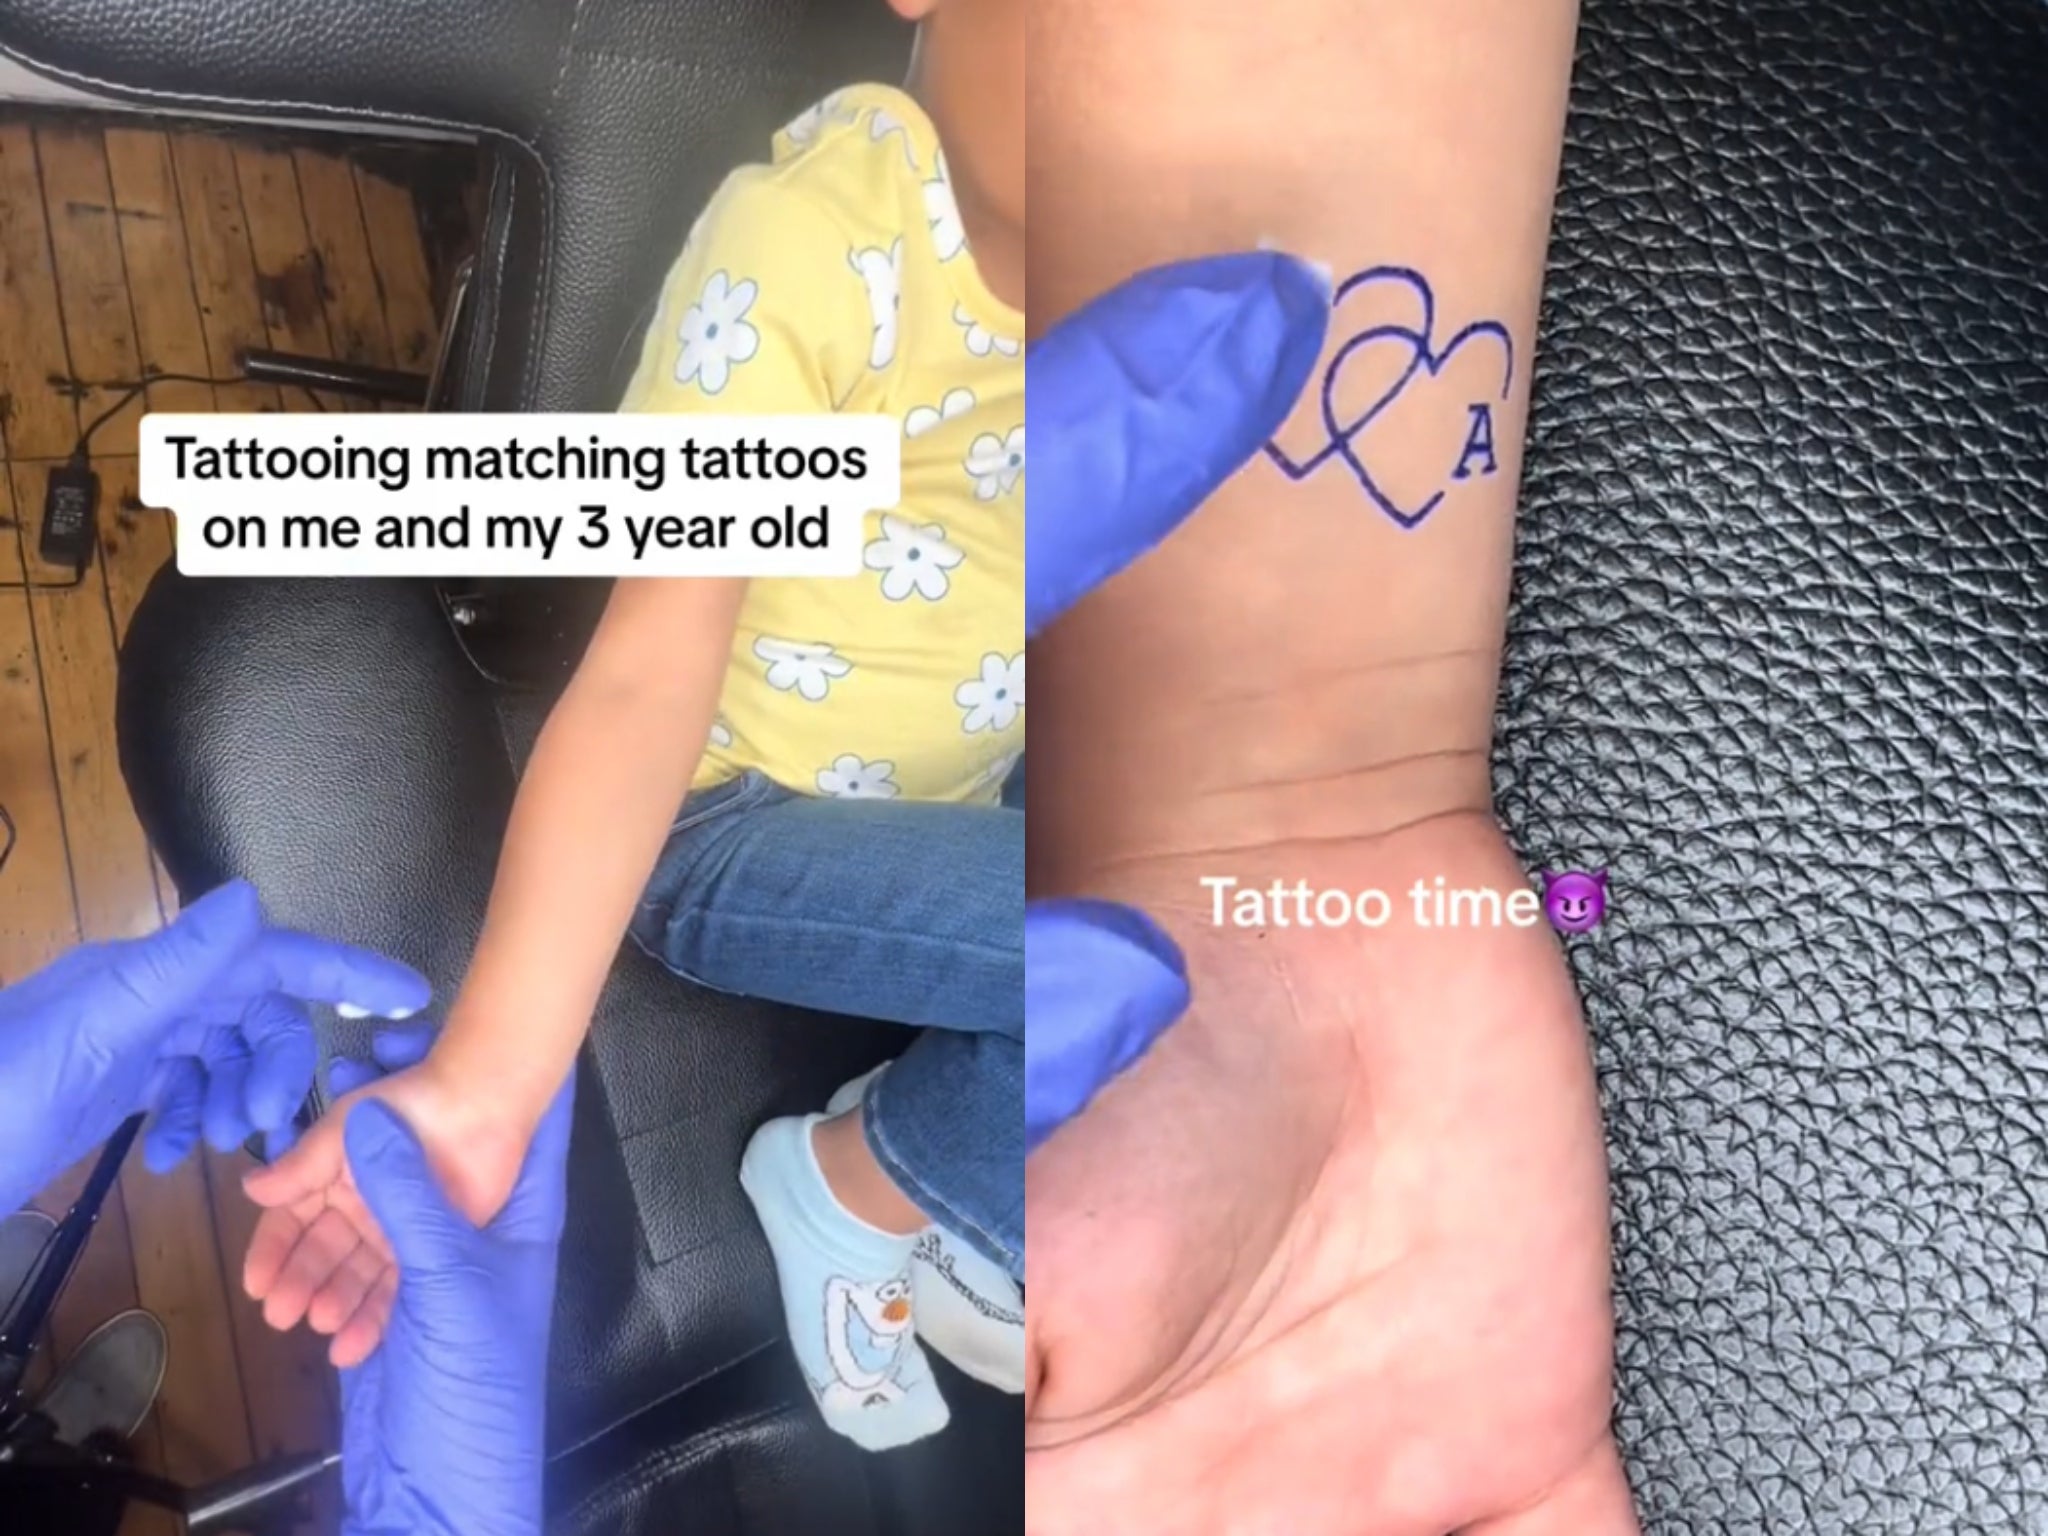 Tattoo artist Kaylee Thomas posted a video on Tiktok of herself “tattooing” her three-year-old daughter